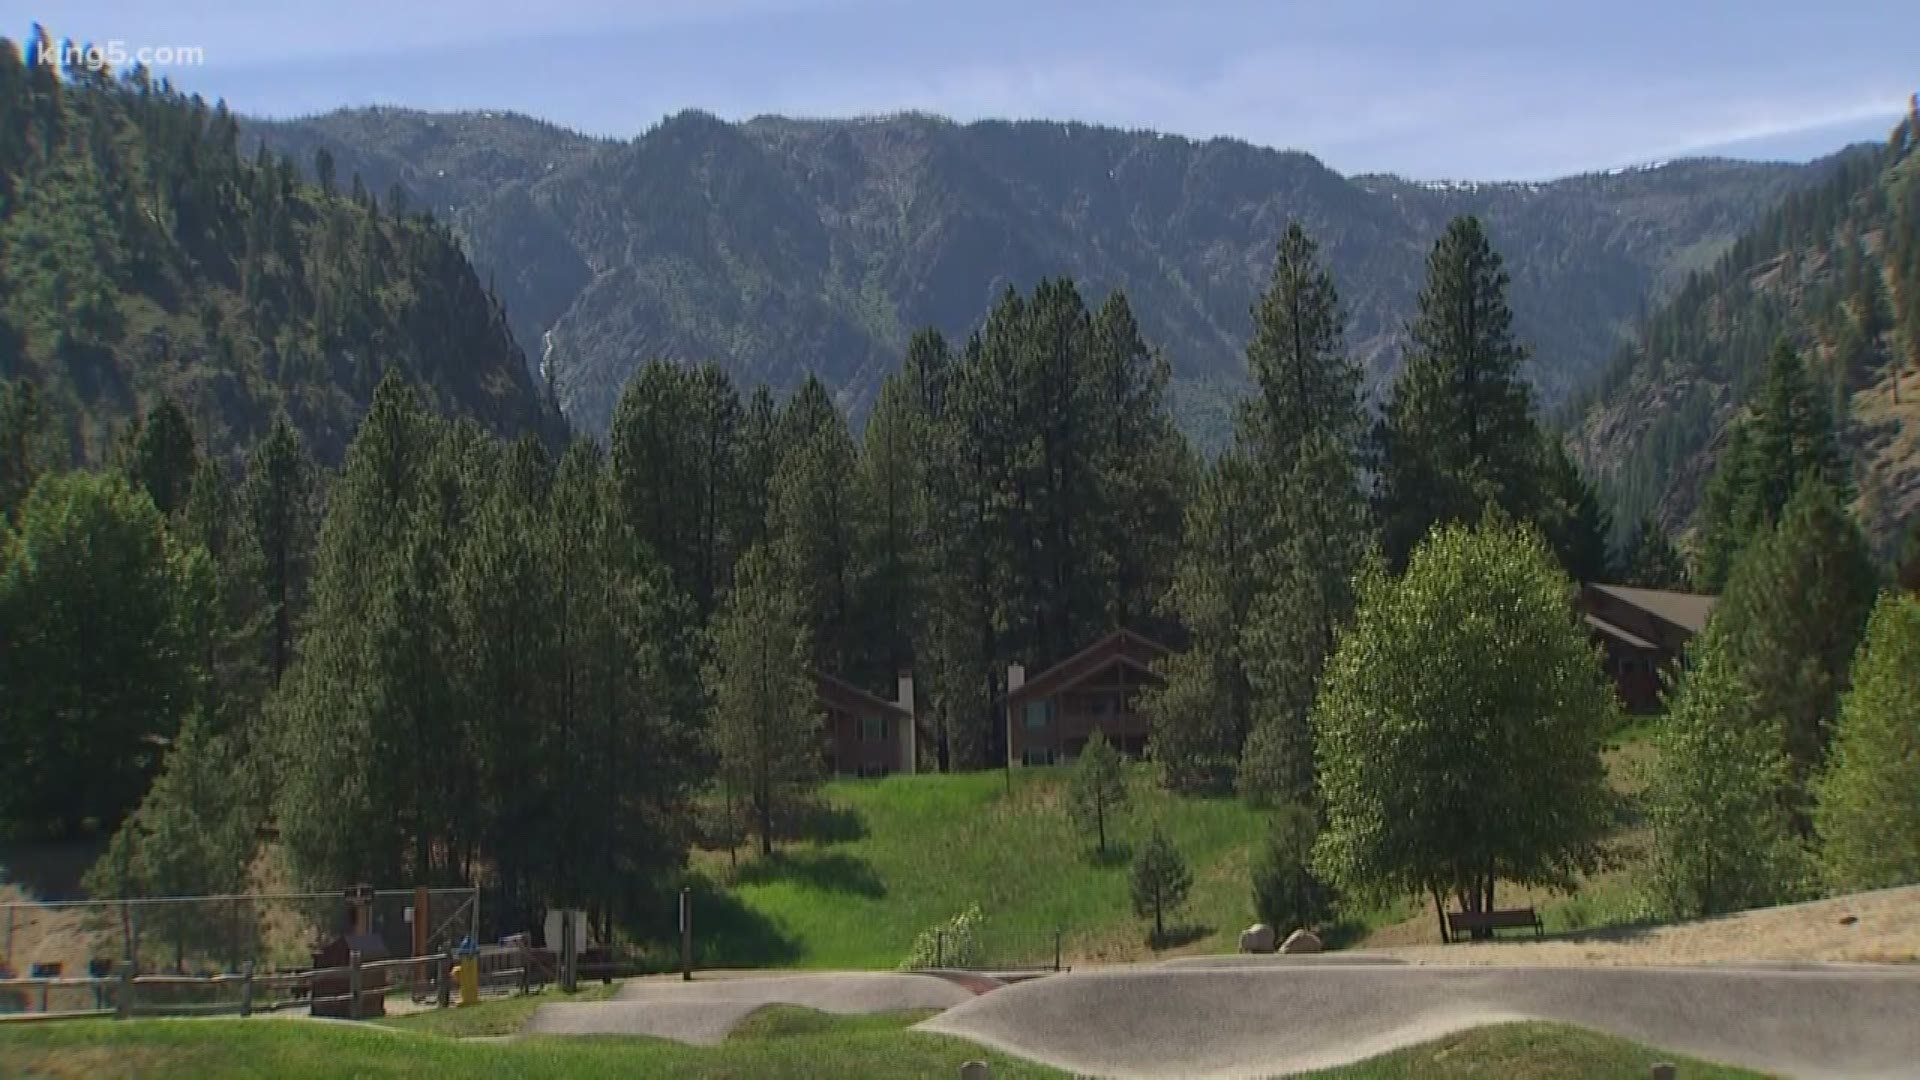 A child escaped an attempted cougar attack in Leavenworth Saturday evening, according to Washington State Patrol.